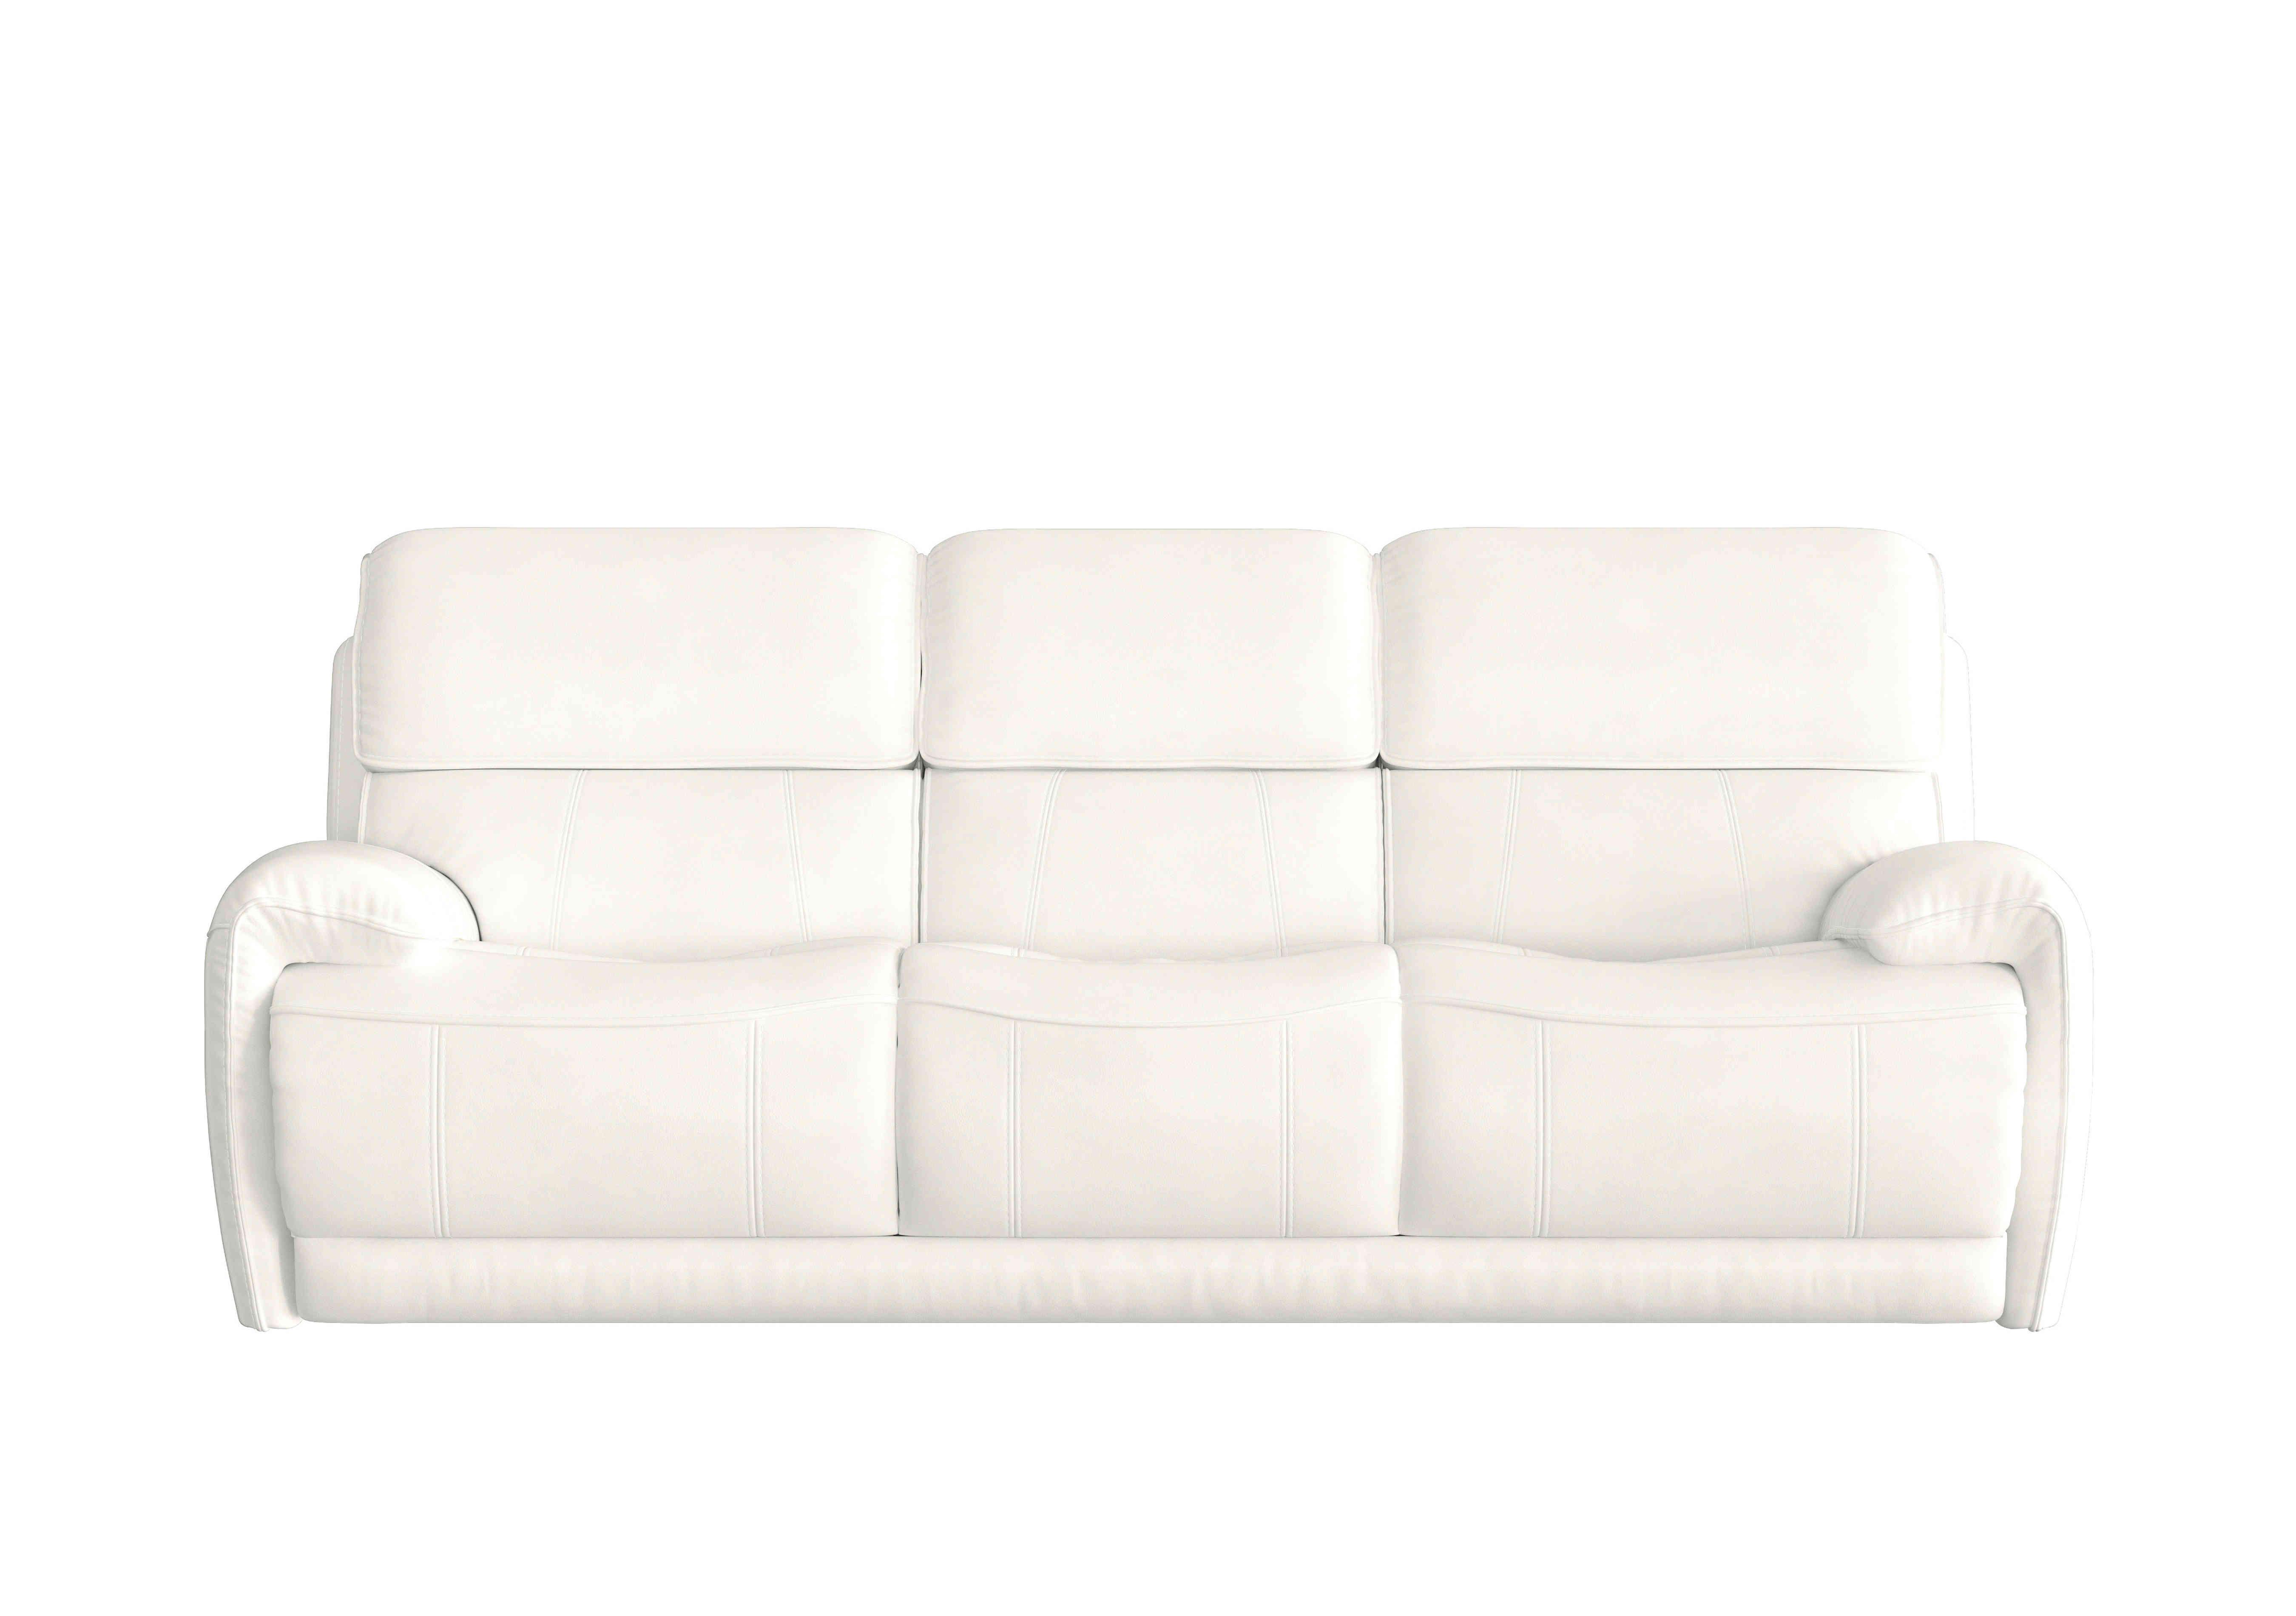 Link 3 Seater Leather Sofa in Bv-744d Star White on Furniture Village